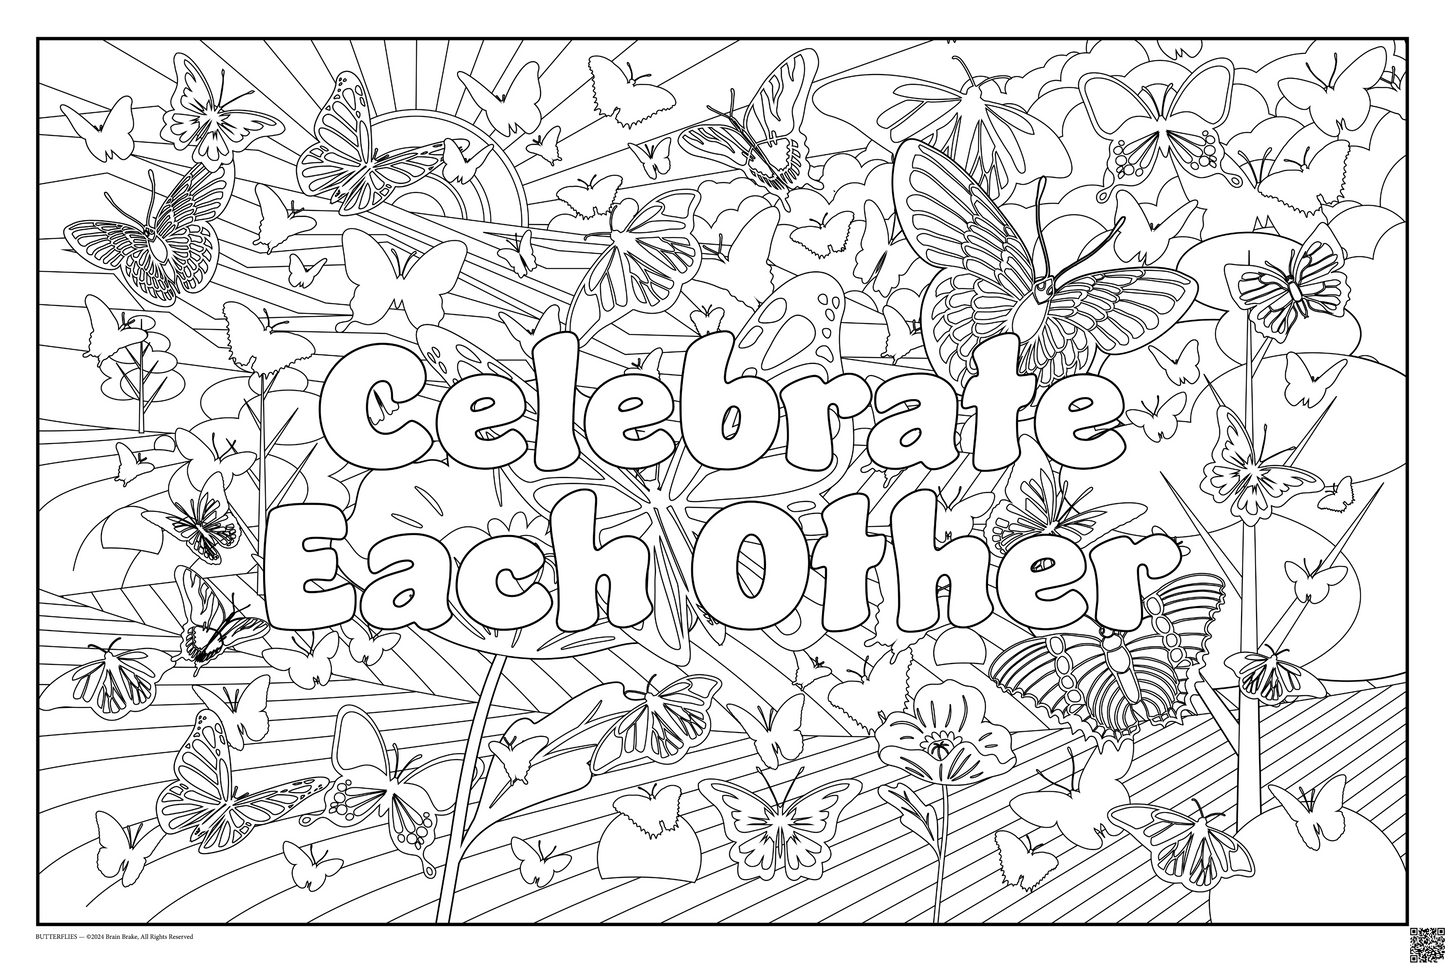 Build Community: Celebrate Each Other